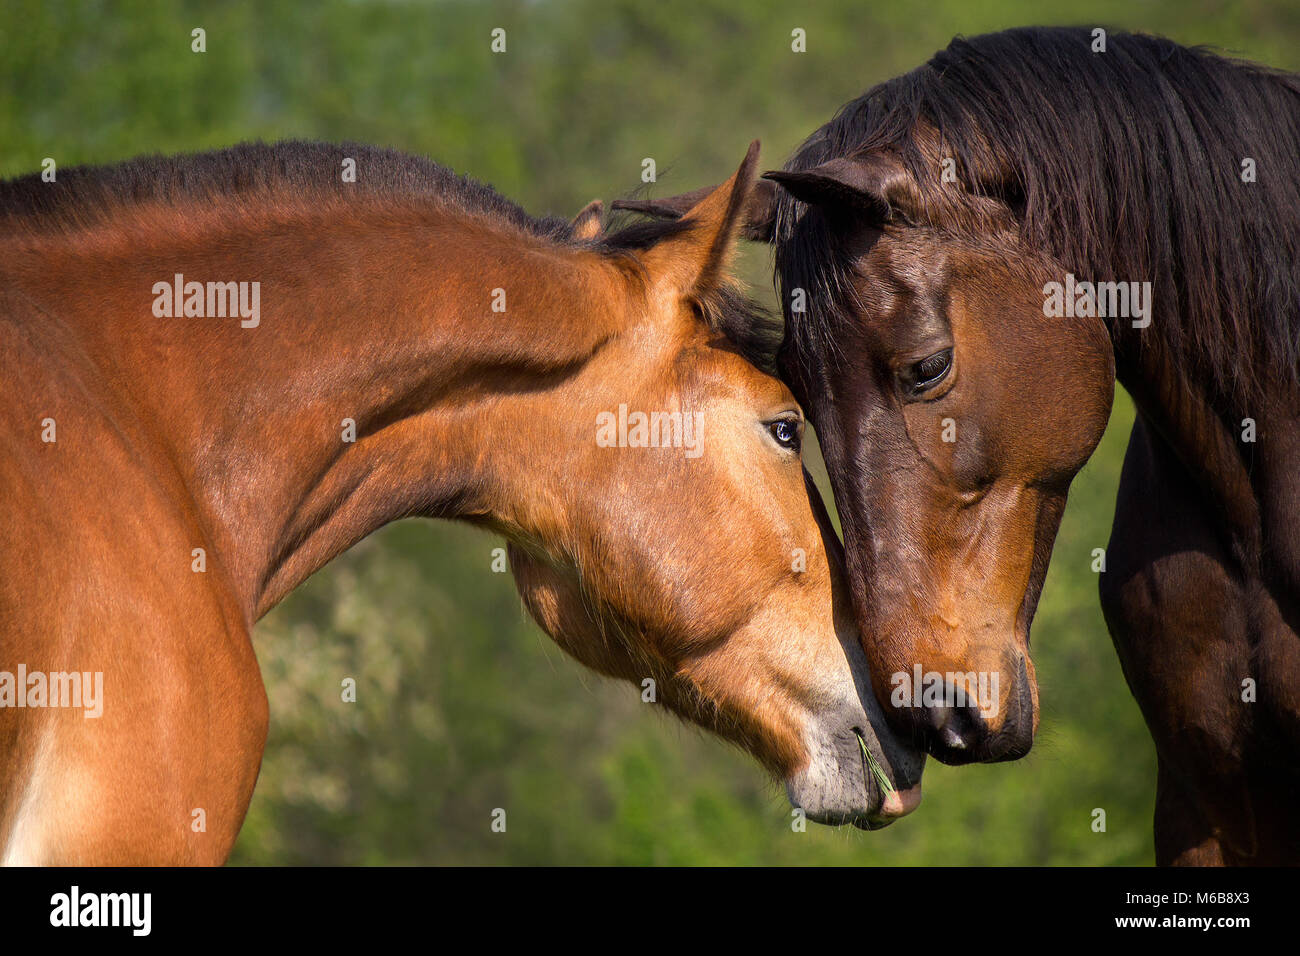 close up of an purebred racing horse Stock Photo